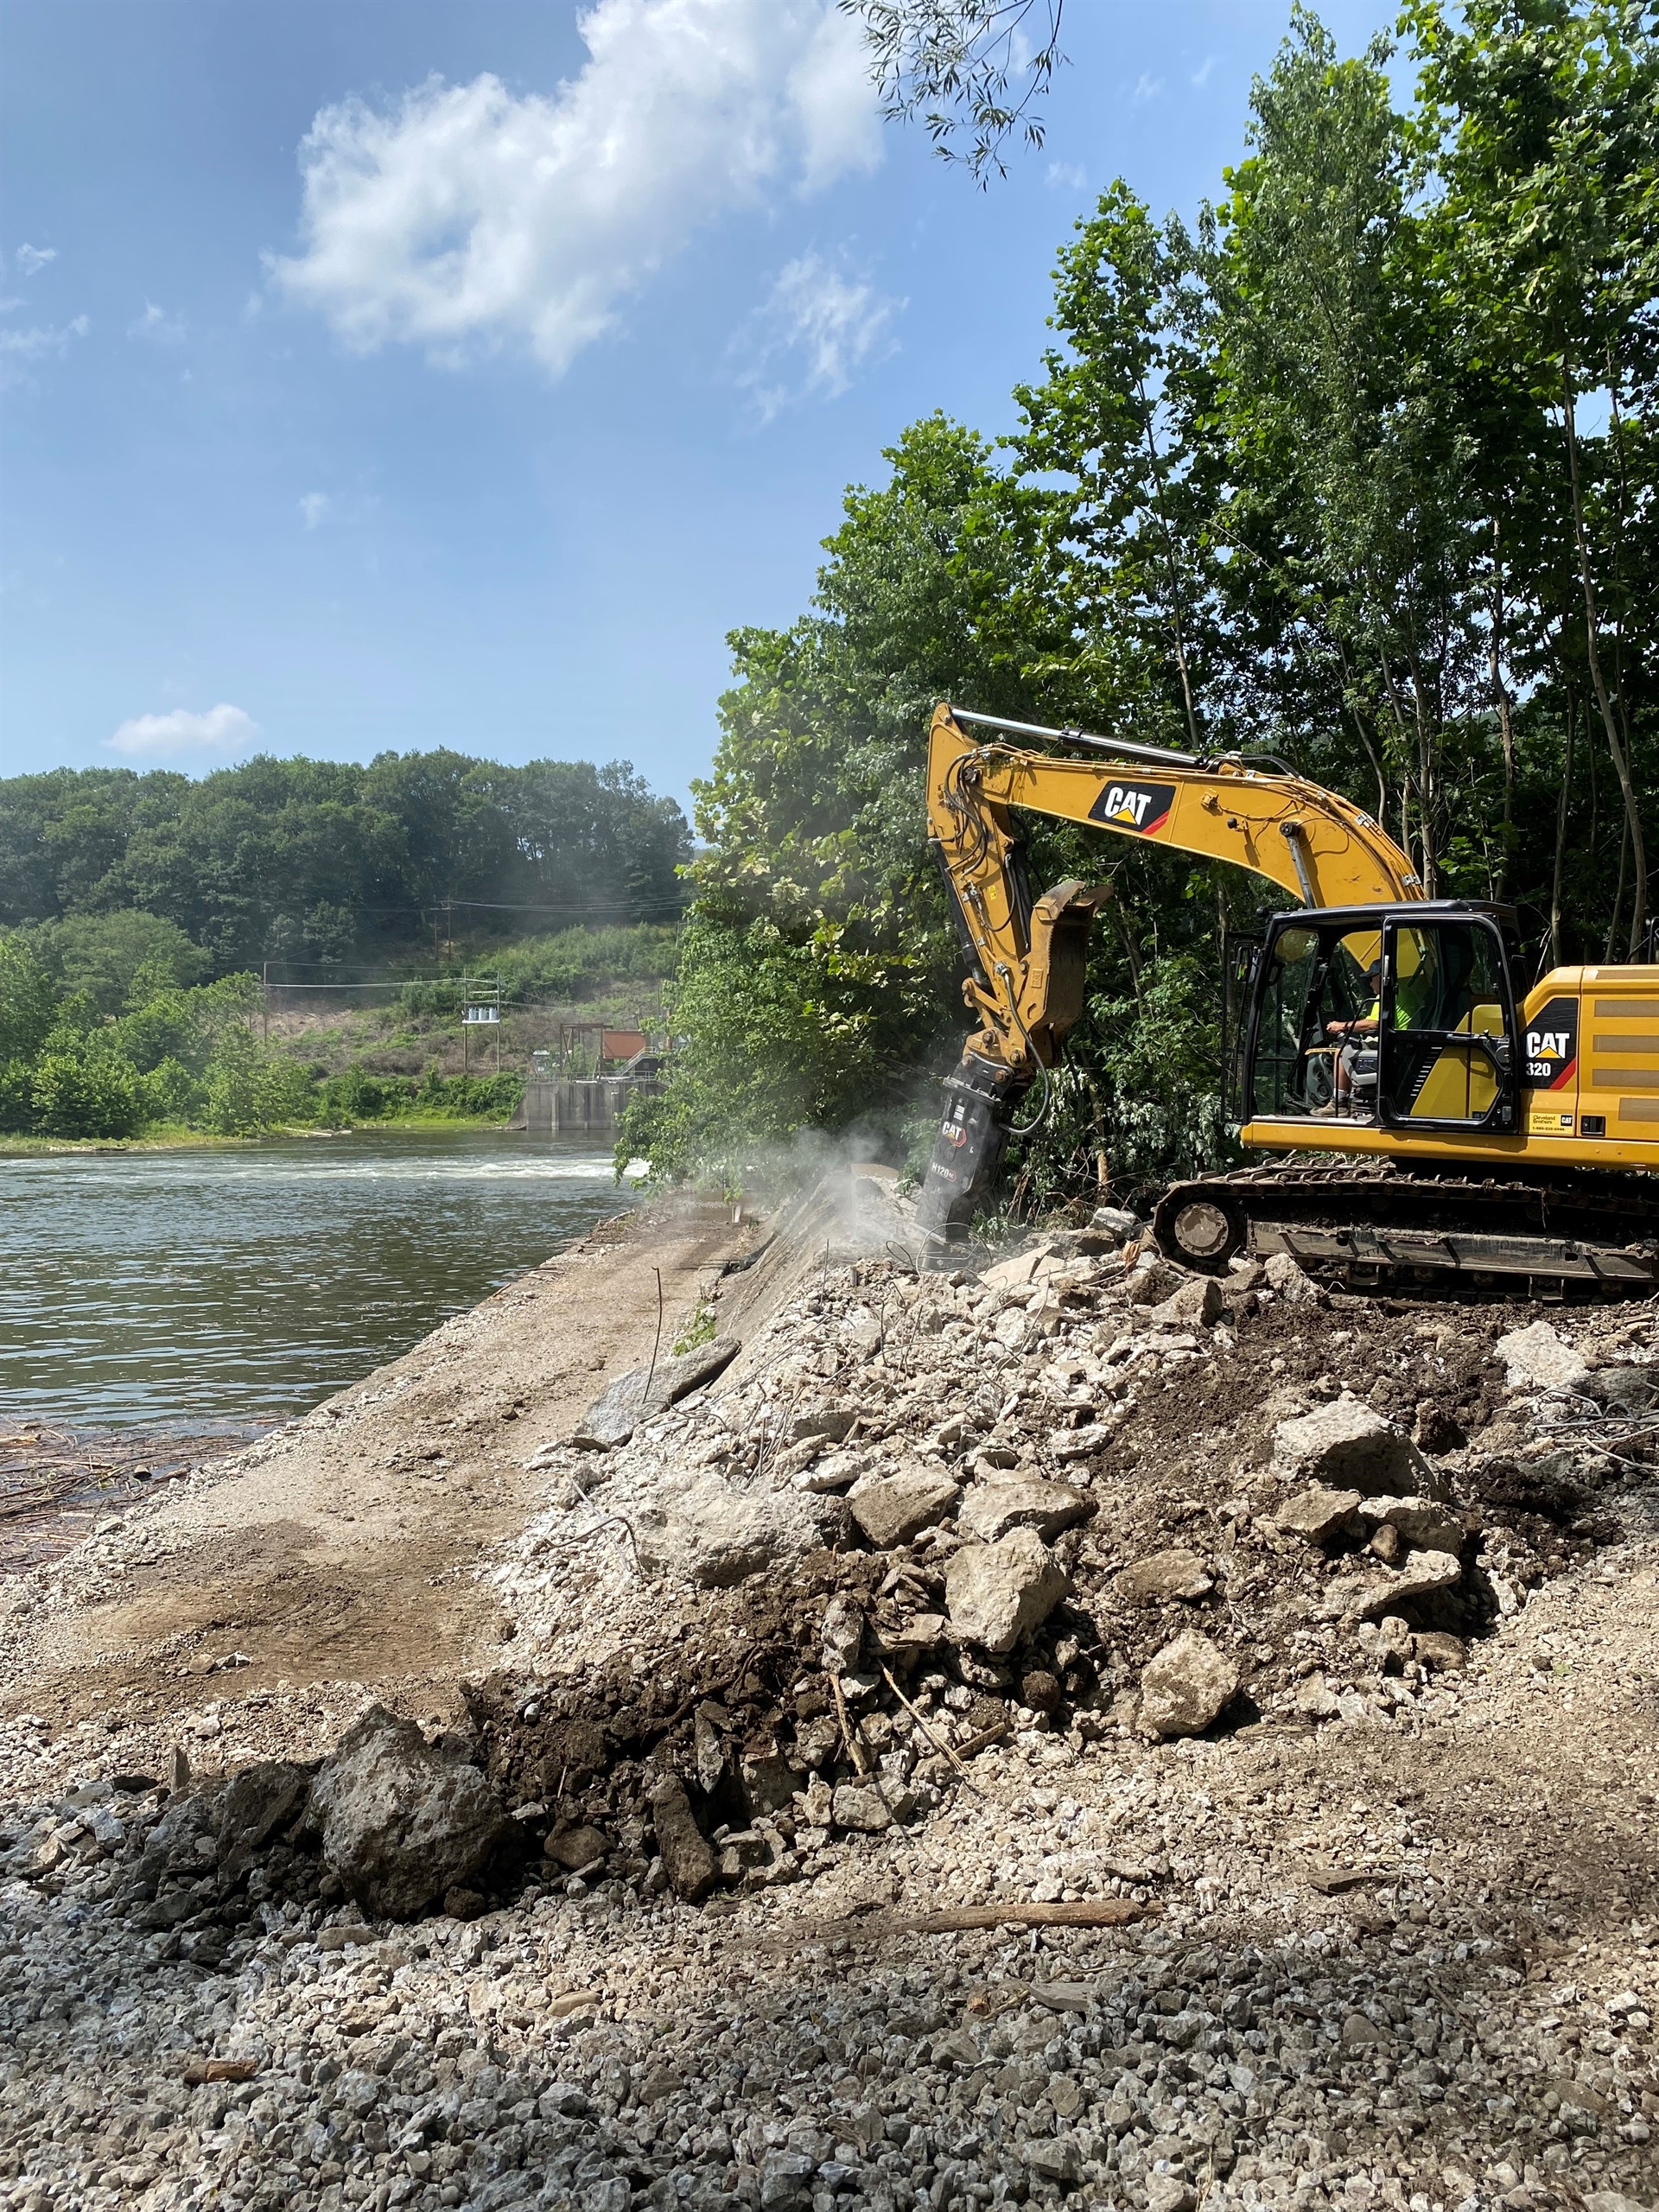 Figure 6. Heavy machinery working on the banks of the Susquehanna River at the Oakland Dam removal site (courtesy of American Rivers).